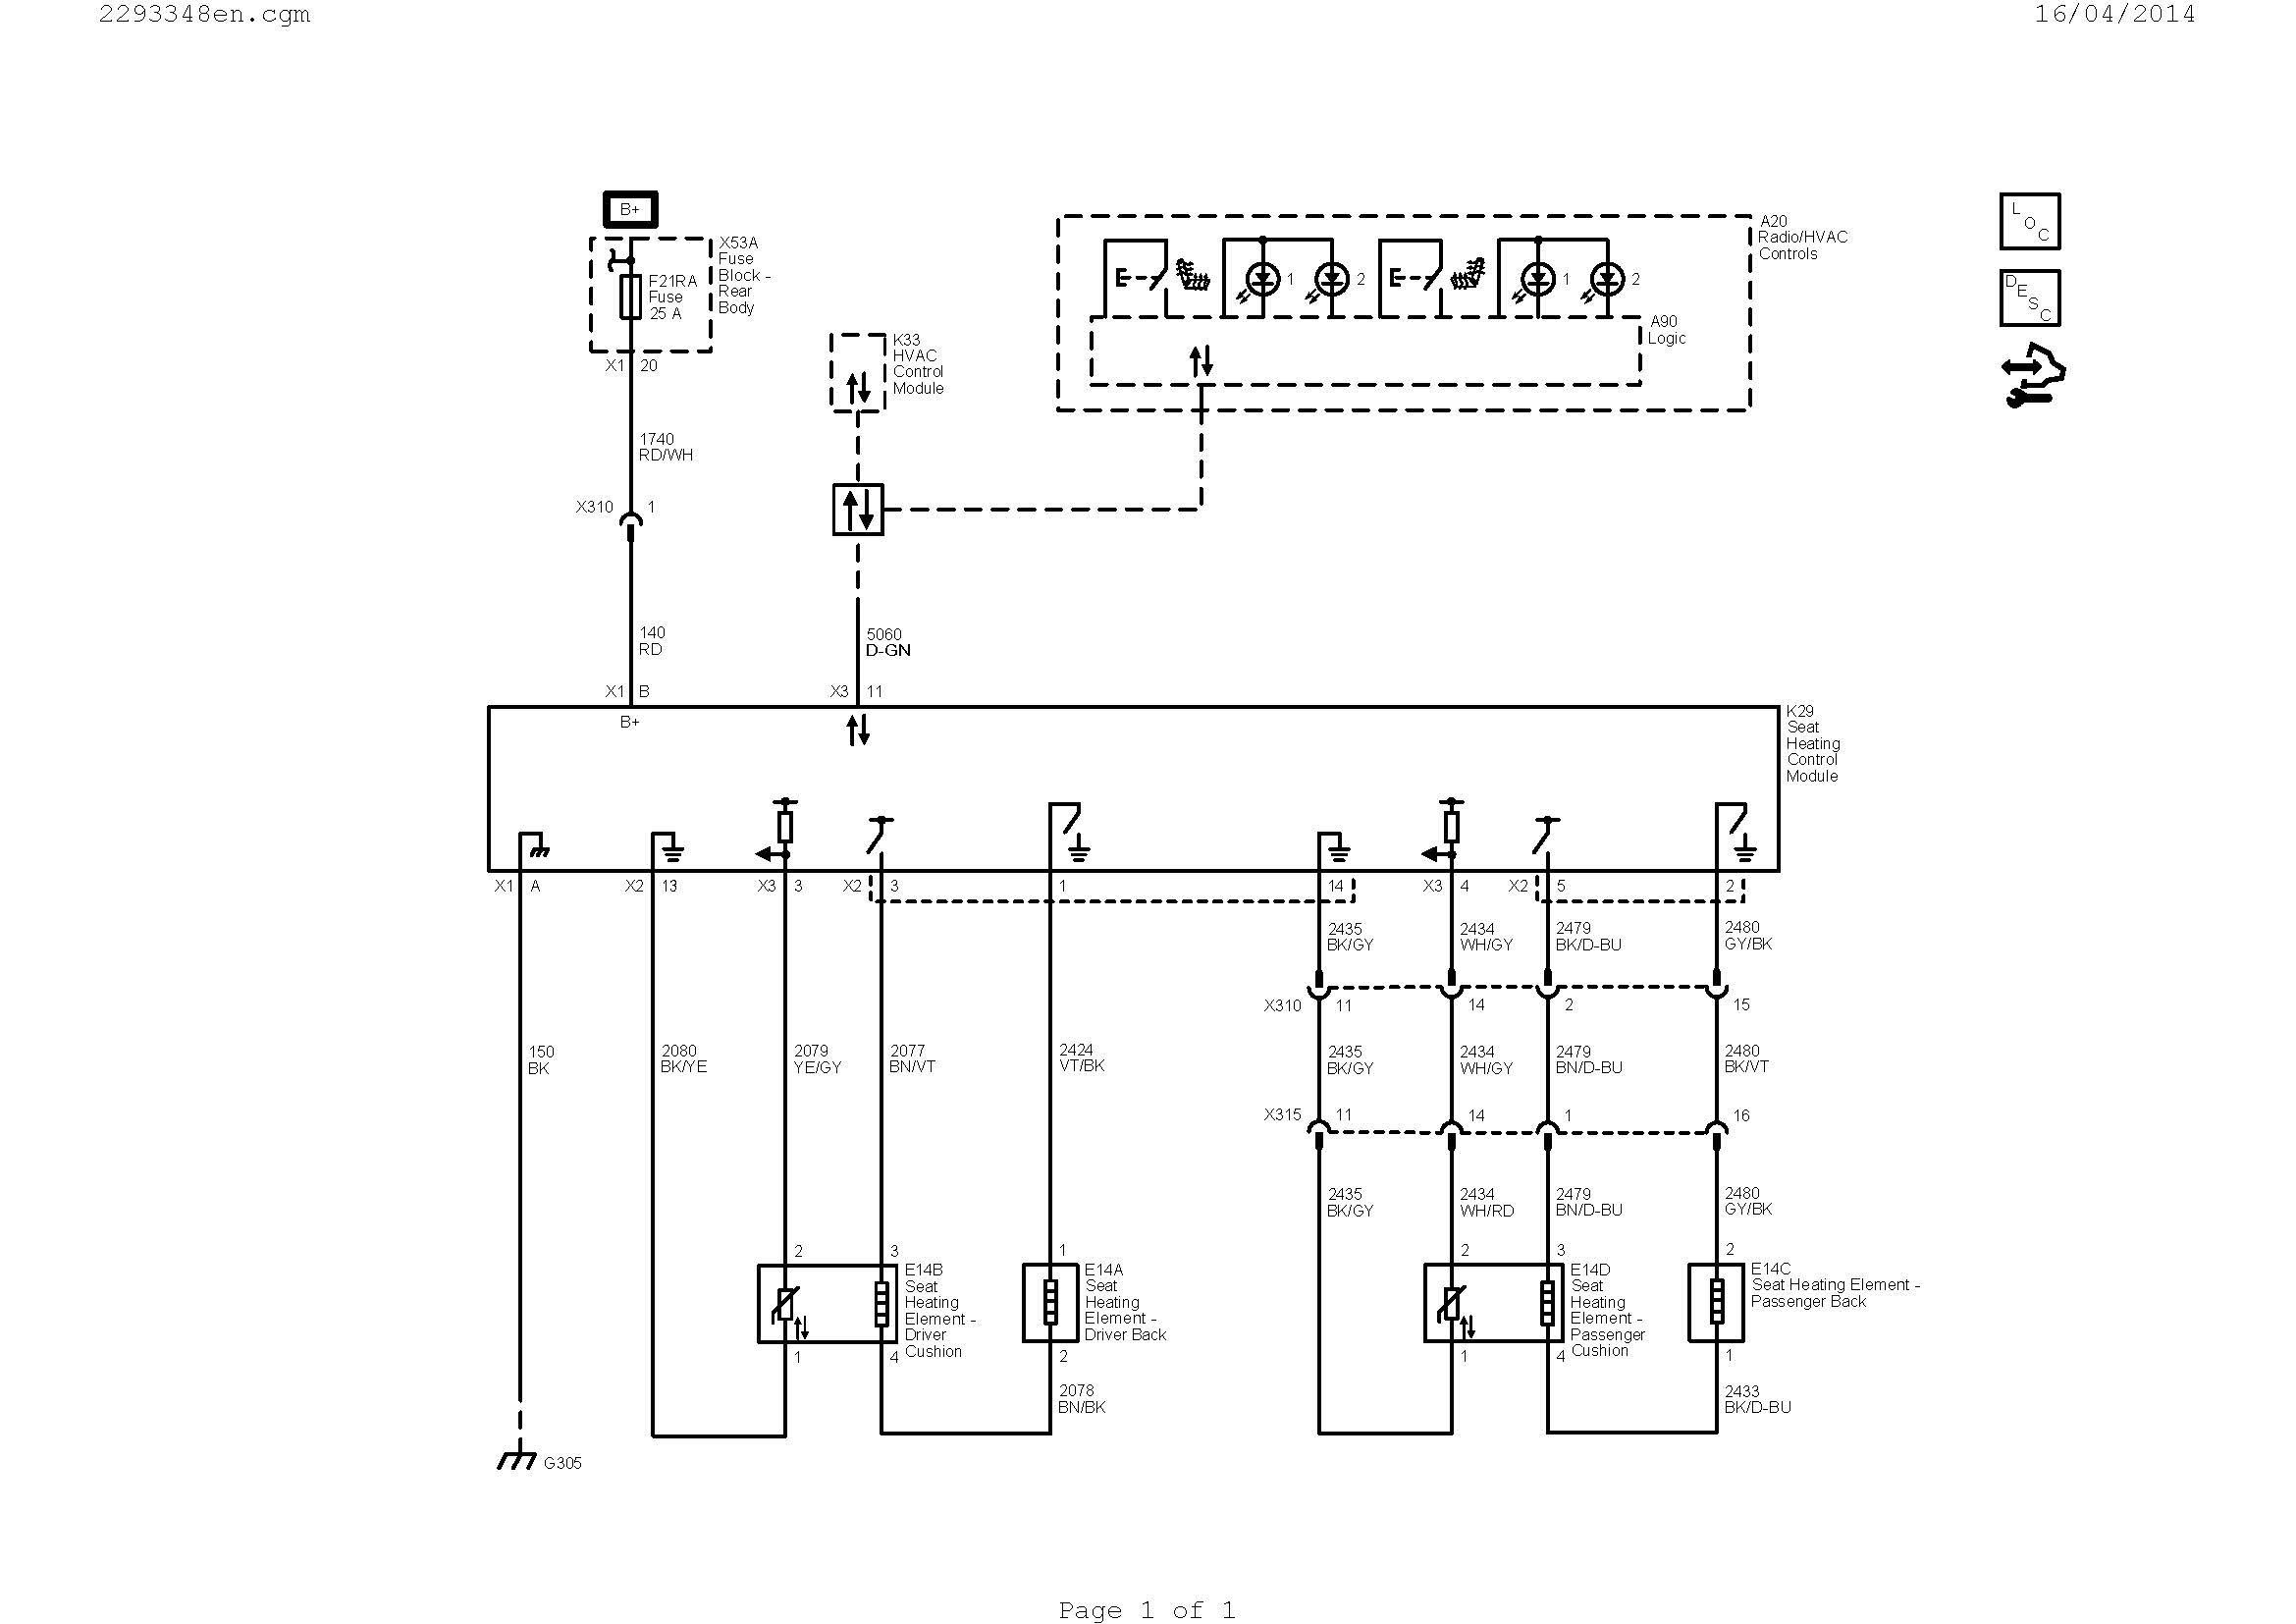 Switch Wiring Diagram Wiring Diagram for A Relay Switch Save Wiring Diagram Ac Valid Hvac